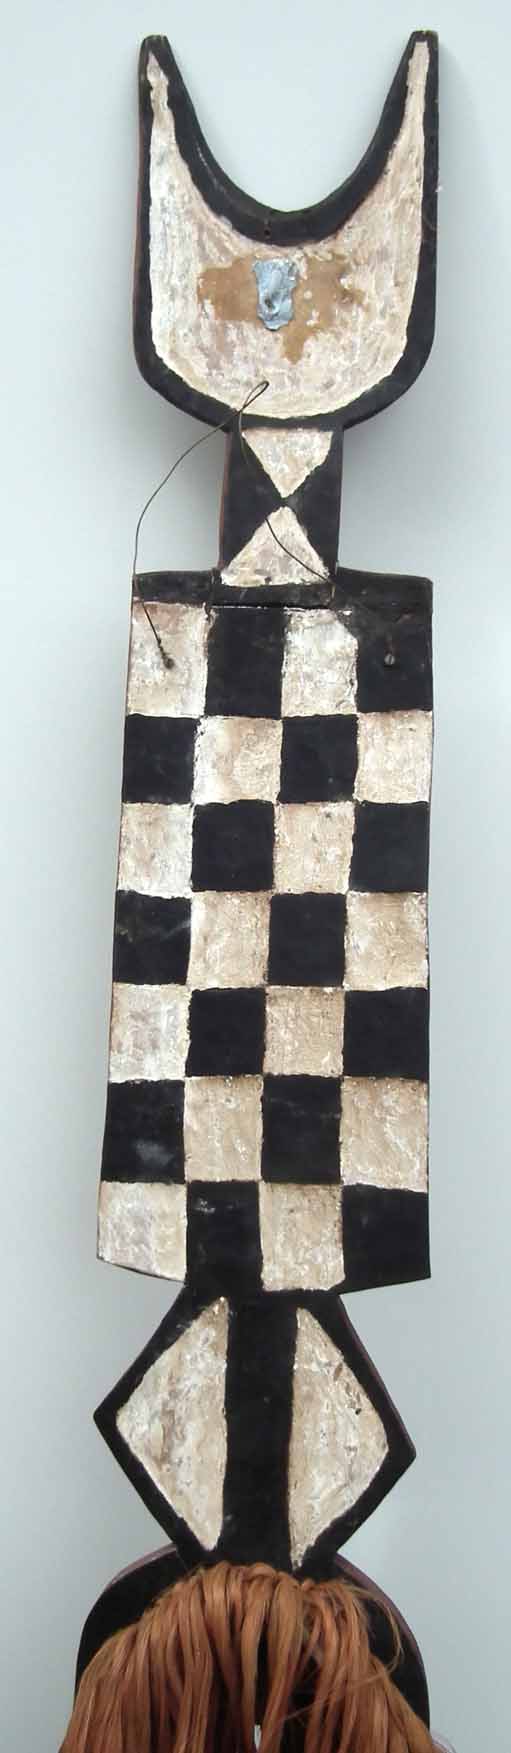 Bobo Bwa plank mask fron Hounde area of Burkina Faso, wood, pigment and fibres, 147cm high excluding - Image 9 of 13